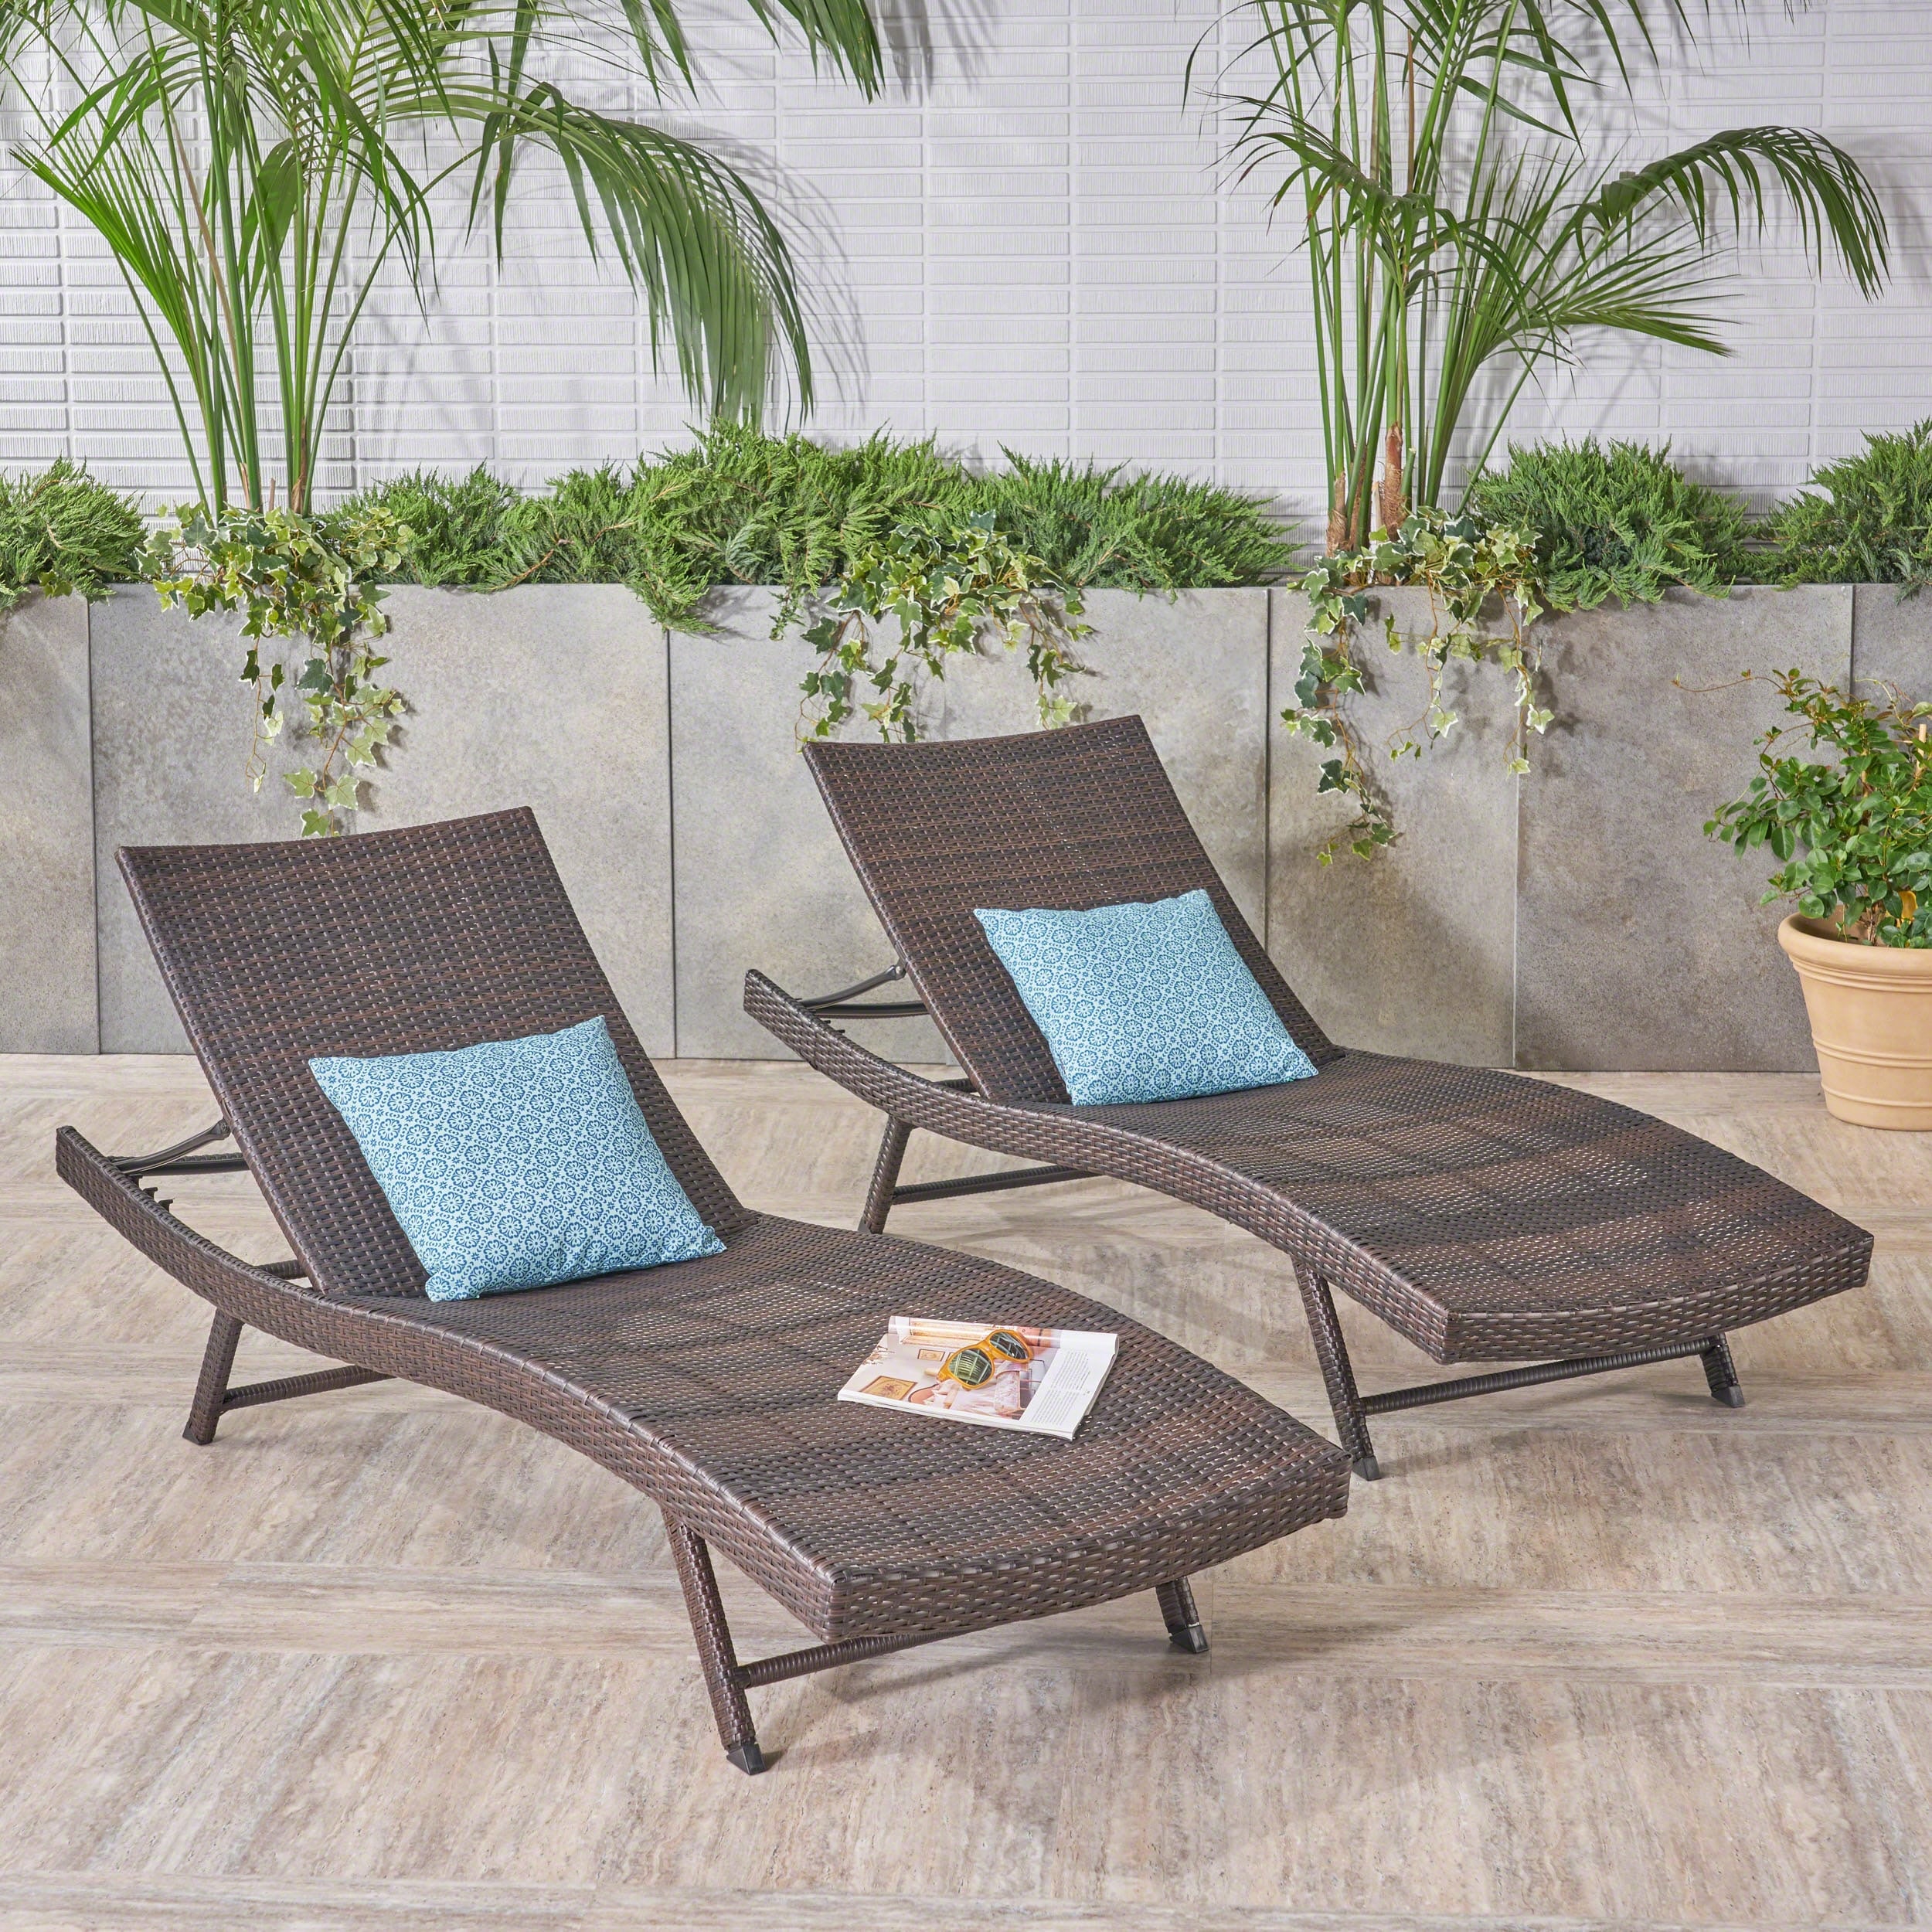 2 Set Outdoor Brown Wicker Adjustable Chaise Loung...